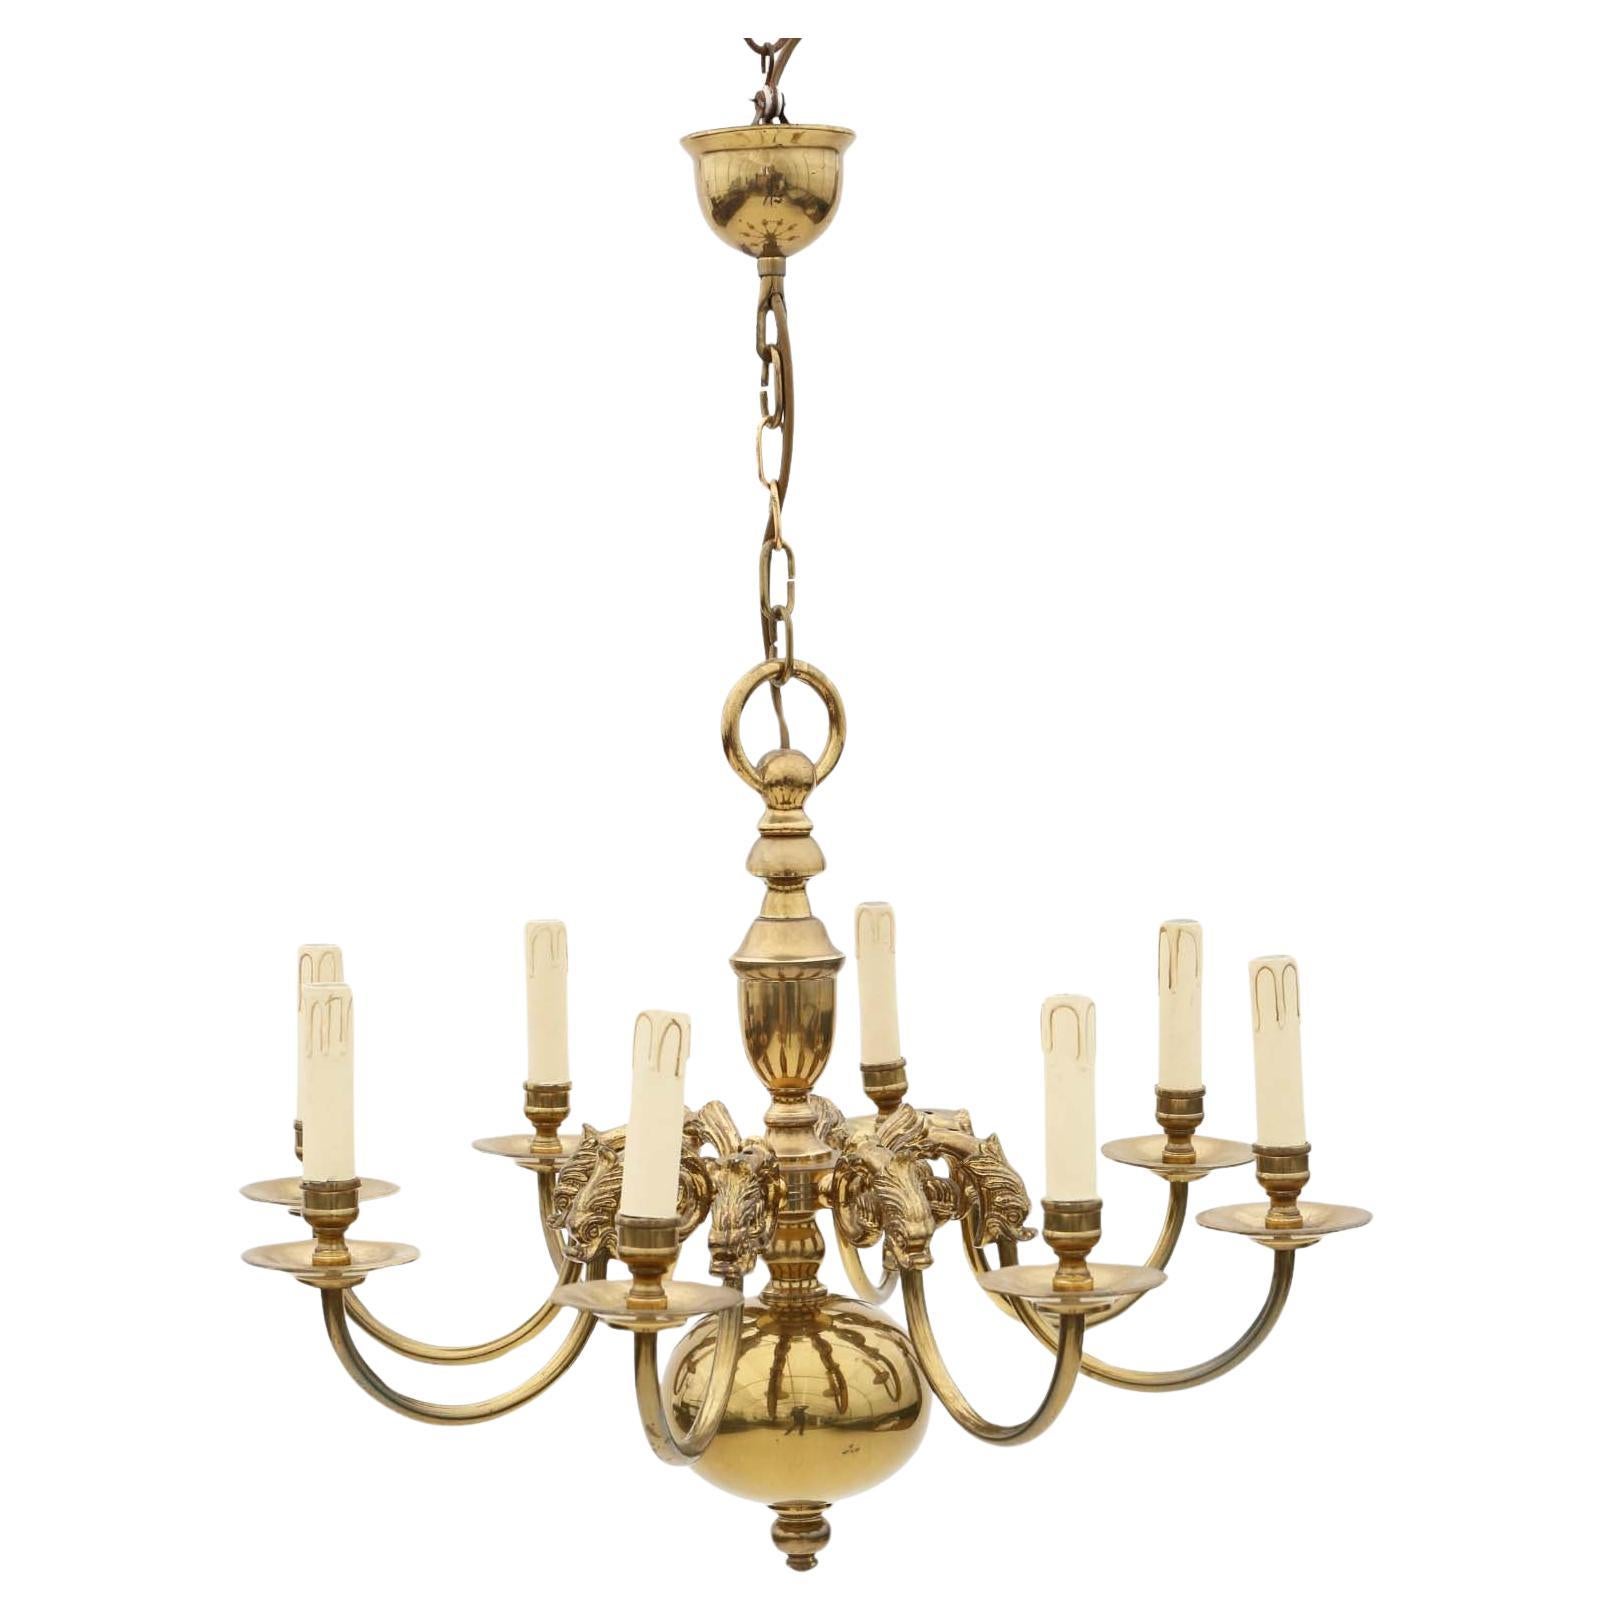 Antique Vintage Ormolu Brass Chandelier with 8 Lamps/Arms